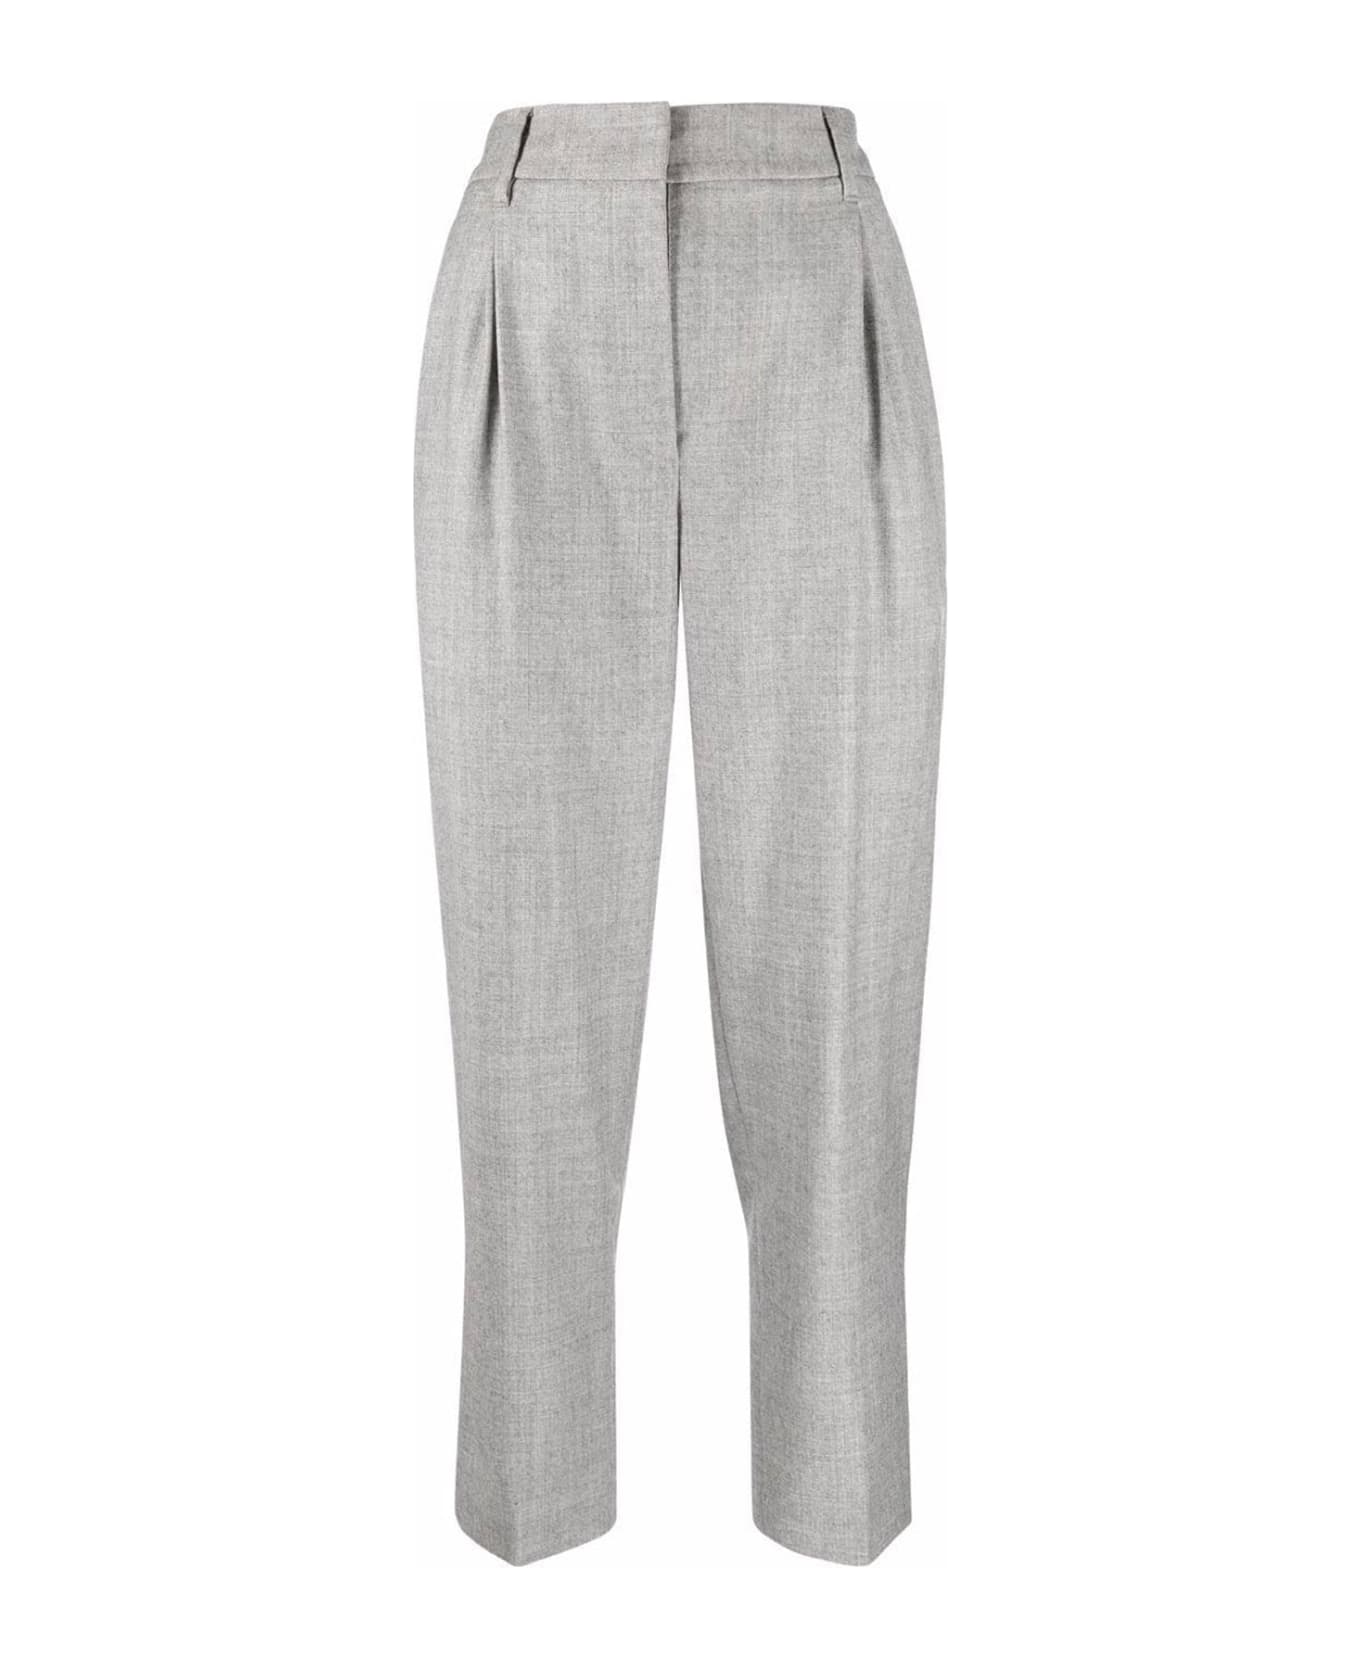 Brunello Cucinelli Cropped Pants - Gray ボトムス